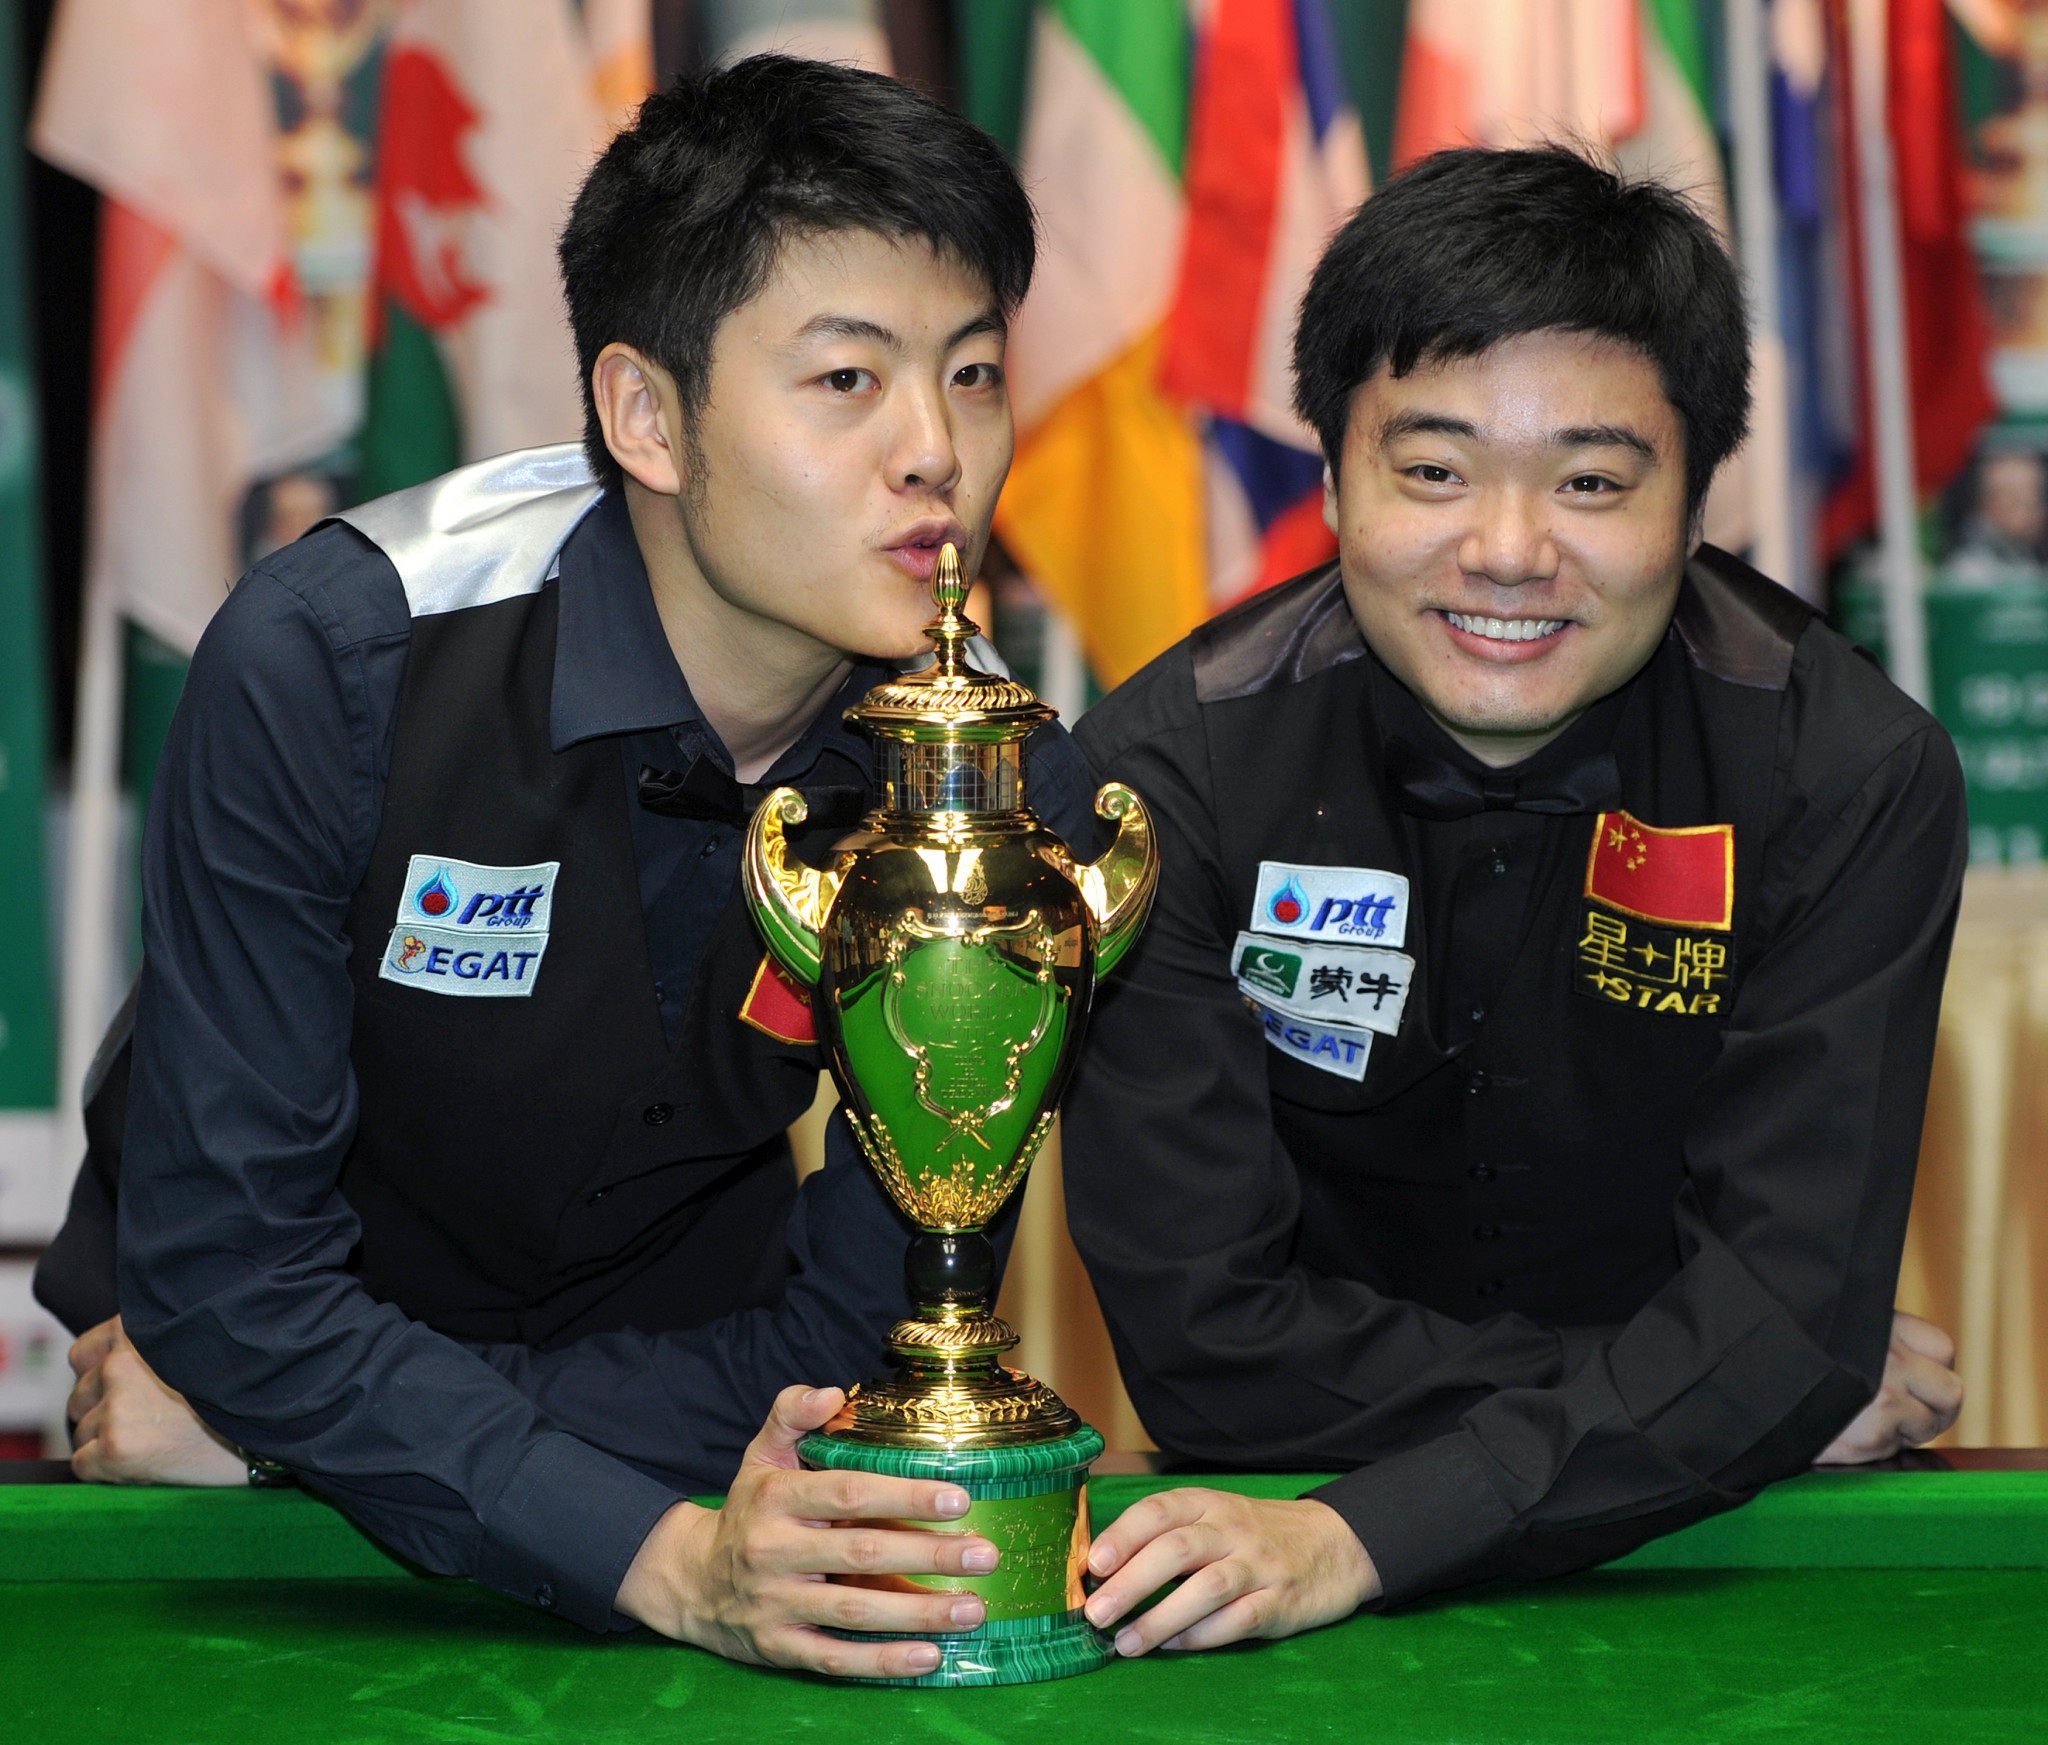 The Snooker World Cup returned from a 10-year hiatus in 2011, when China's Ding Junhui and Liang Wenbo triumphed in Bangkok ©Getty Images